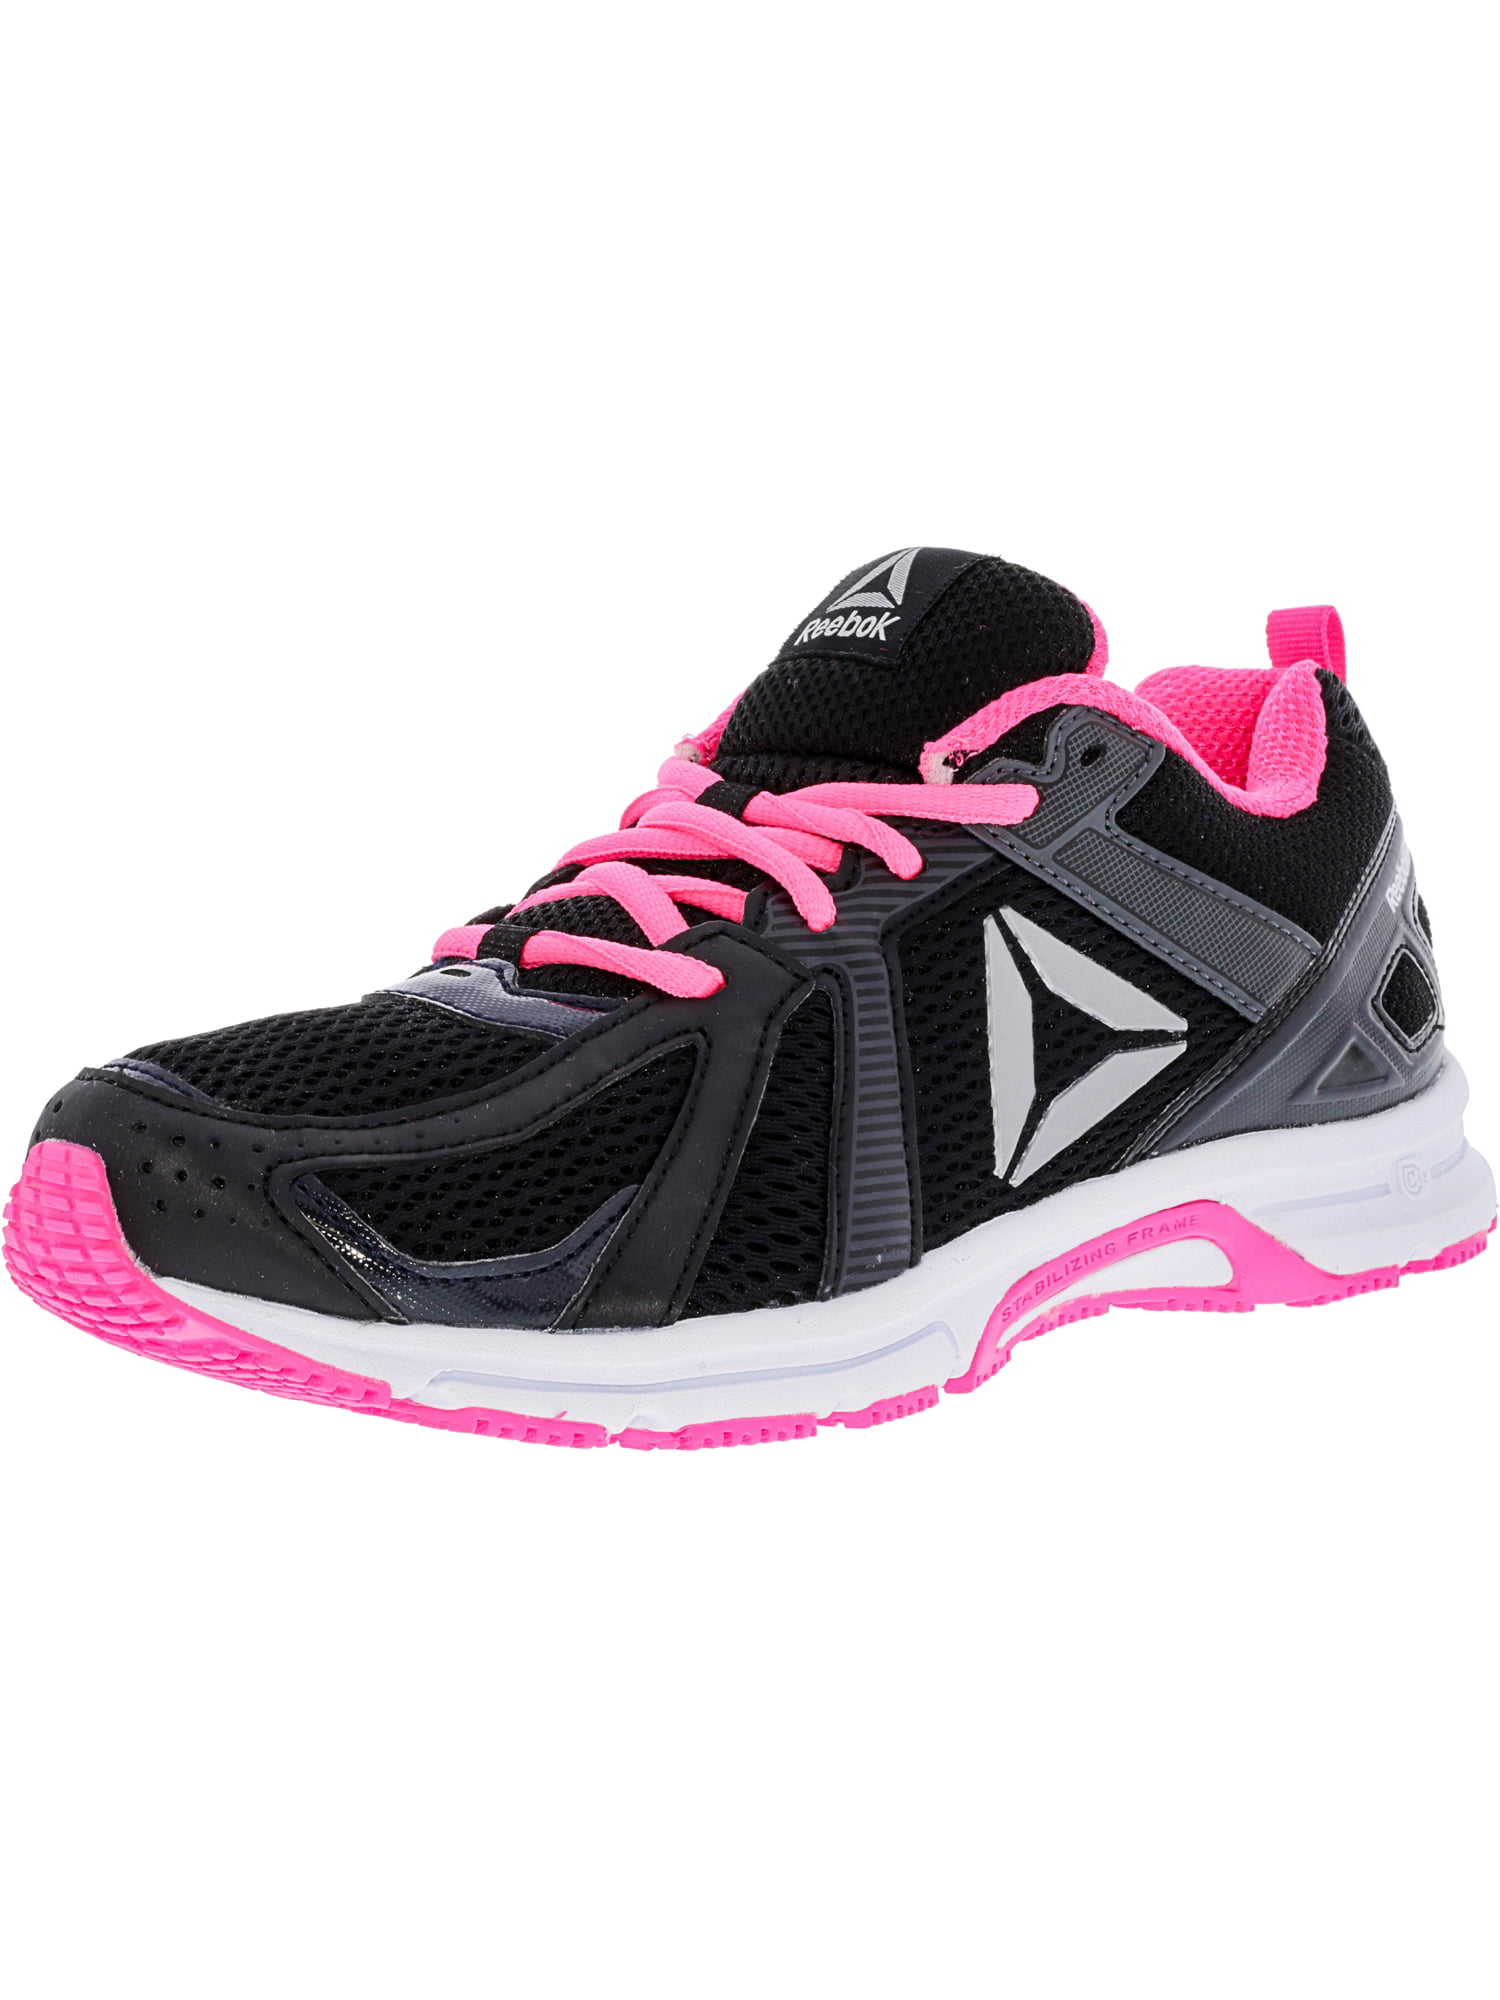 reebok running shoes black and pink